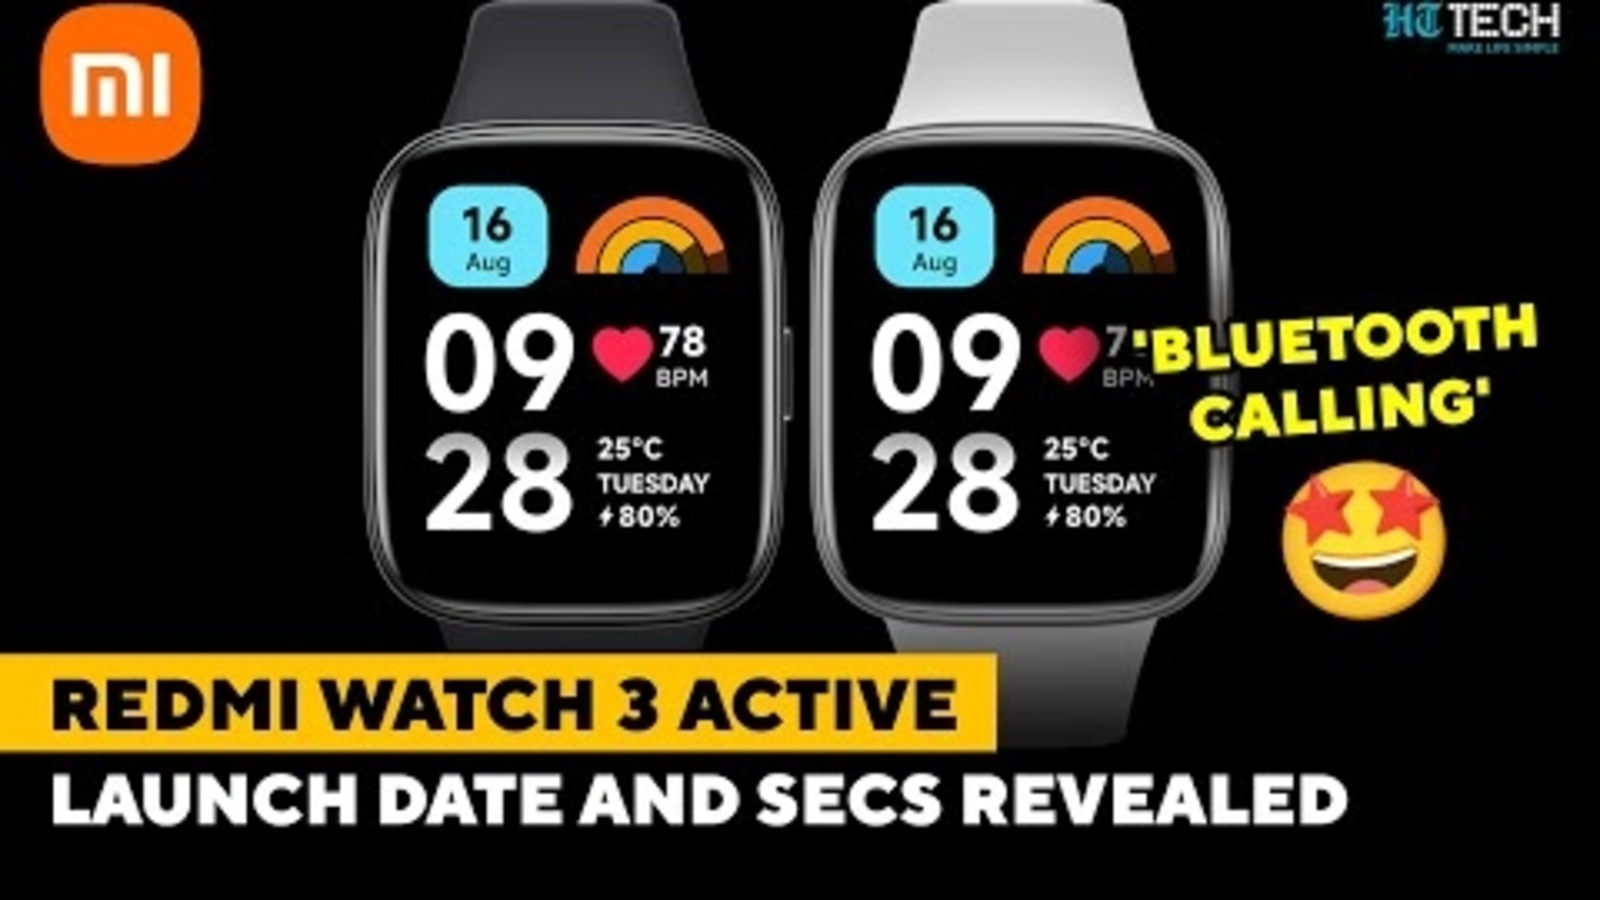 Leak suggests Redmi Watch 4 global edition could launch soon - Wareable